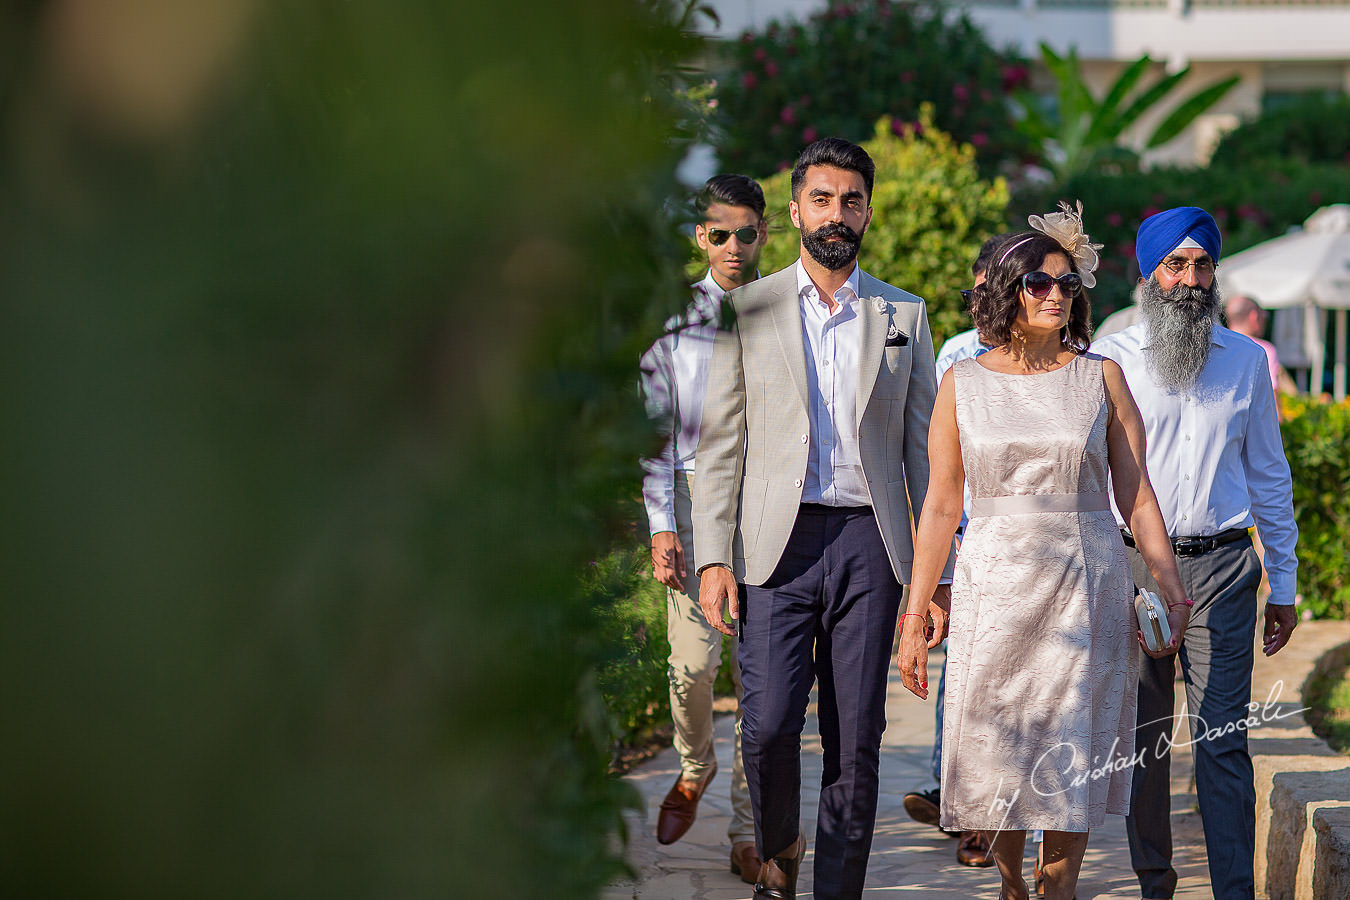 The groom arriving for the wedding ceremony, moments photographed by Cristian Dascalu at Athena Beach Hotel in Paphos, Cyprus, during a symbolic wedding.